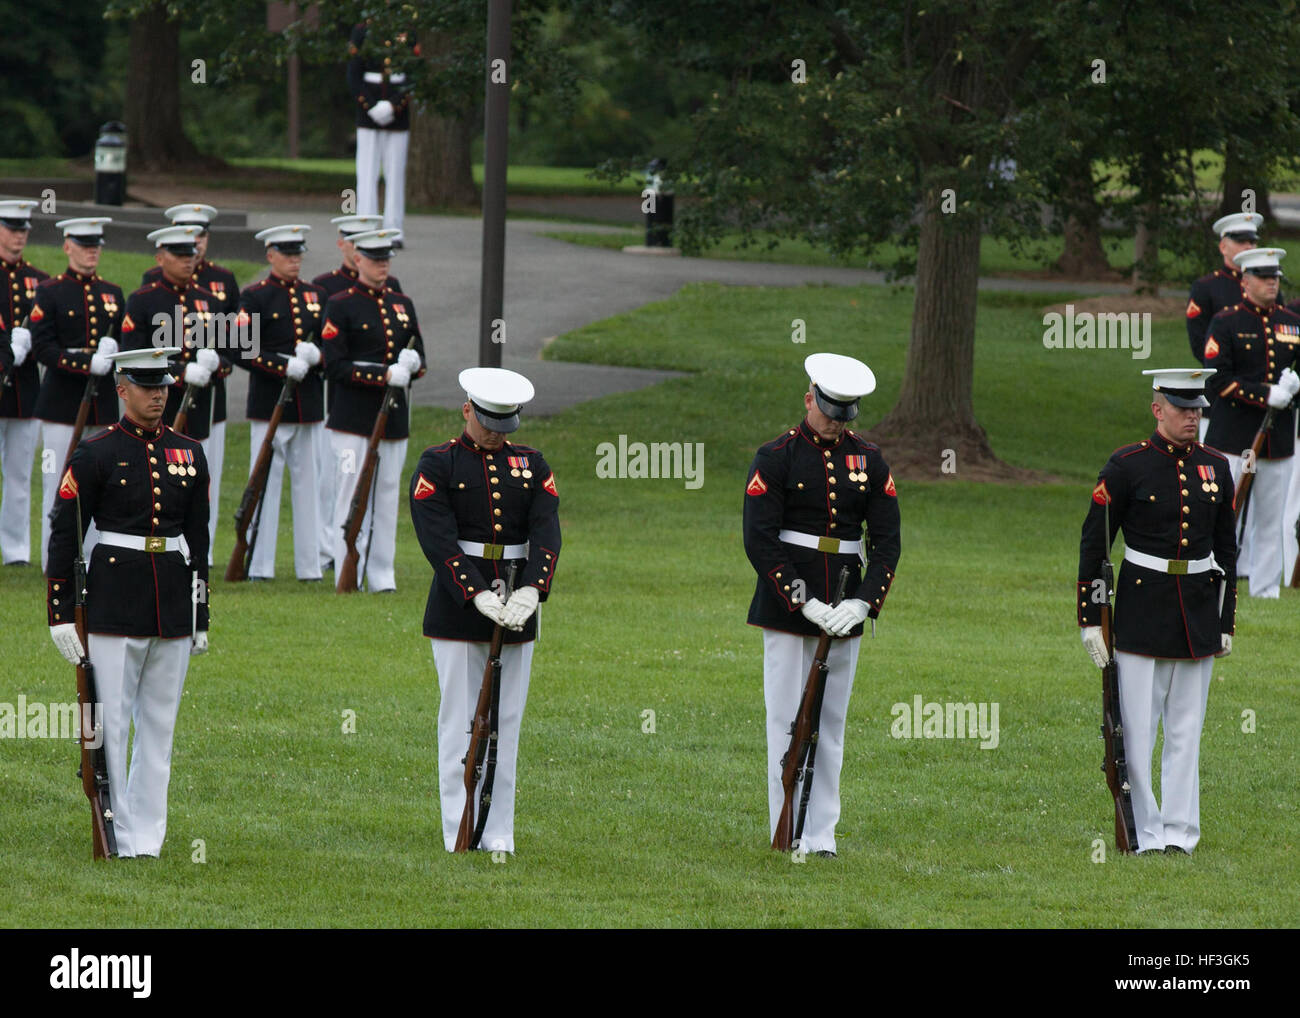 U.S. Marines with the Silent Drill Platoon perform during a sunset parade at the Marine Corps War Memorial, Arlington, Va., July 14, 2015. Dr. Jamie M. Morin, director, Cost Assessment and Program Evaluation, was the guest of honor for the parade, and Lt. Gen. Robert E. Schmidle, principal deputy director, Assessment and Program Evaluation, was the hosting official. Since September 1956, marching and musical units from Marine Barracks Washington, D.C., have been paying tribute to those whose “uncommon valor was a common virtue” by presenting sunset parades in the shadow of the 32-foot high fig Stock Photo